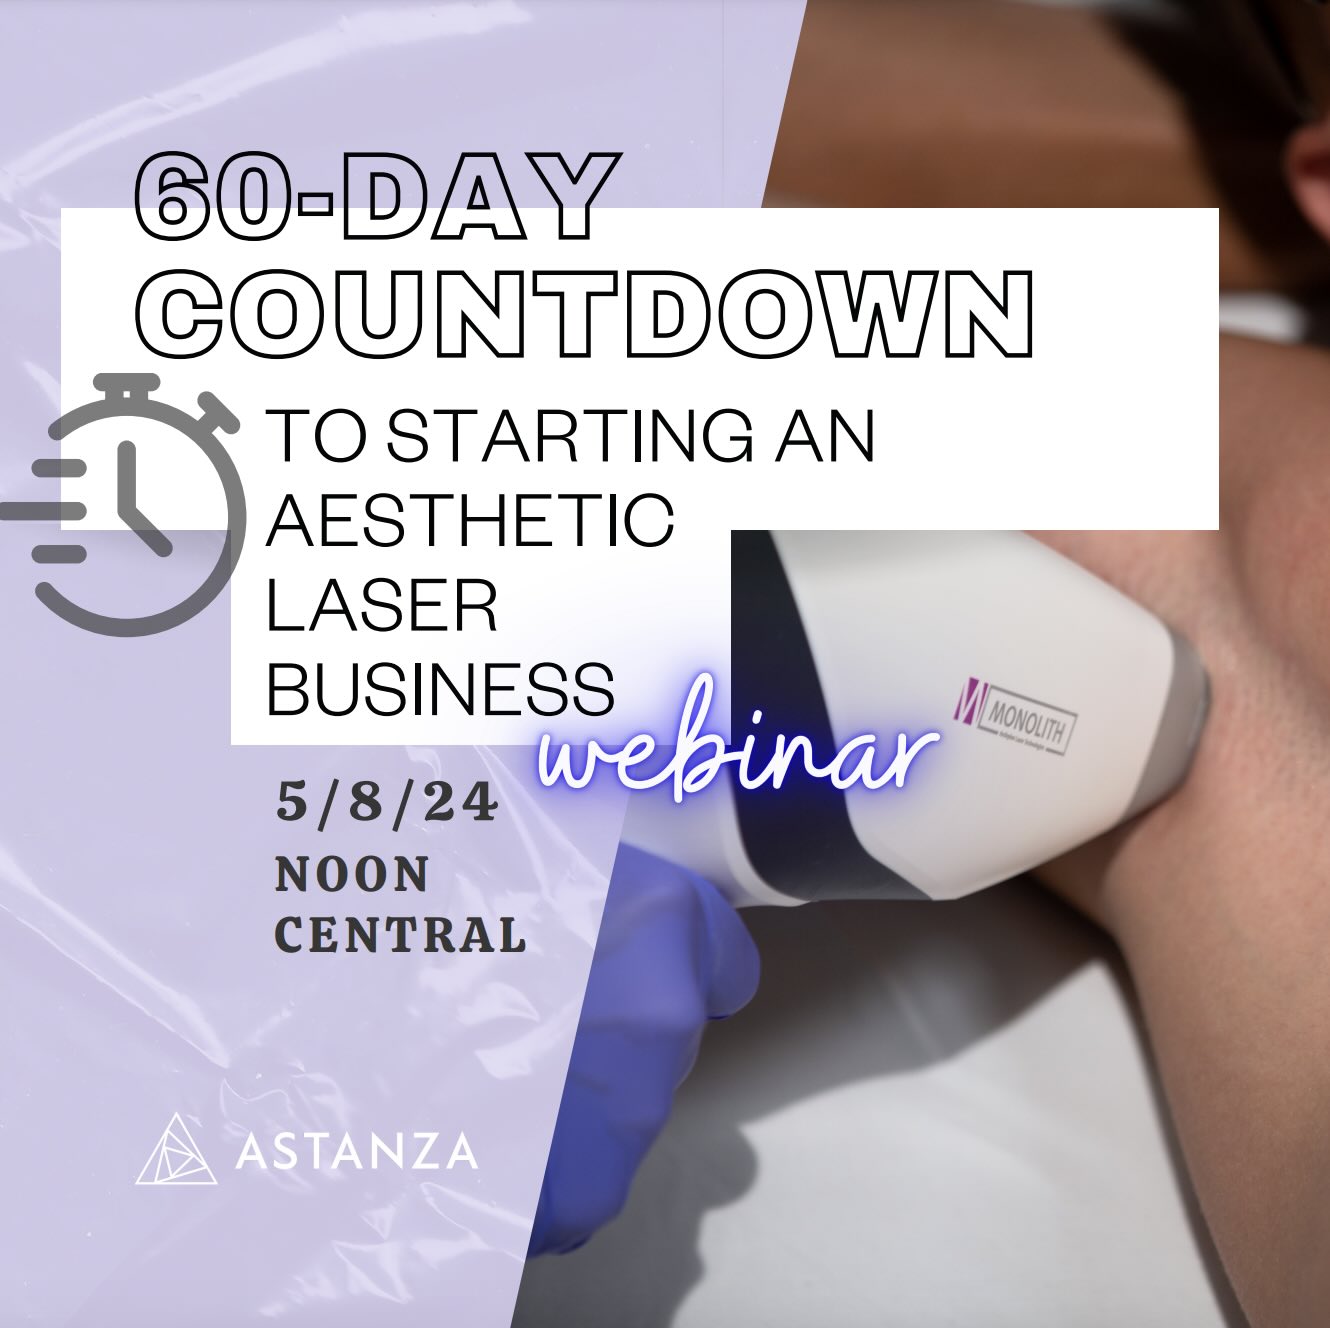 webinar - 60 day countdown to starting an aesthetic laser business webinar featured image